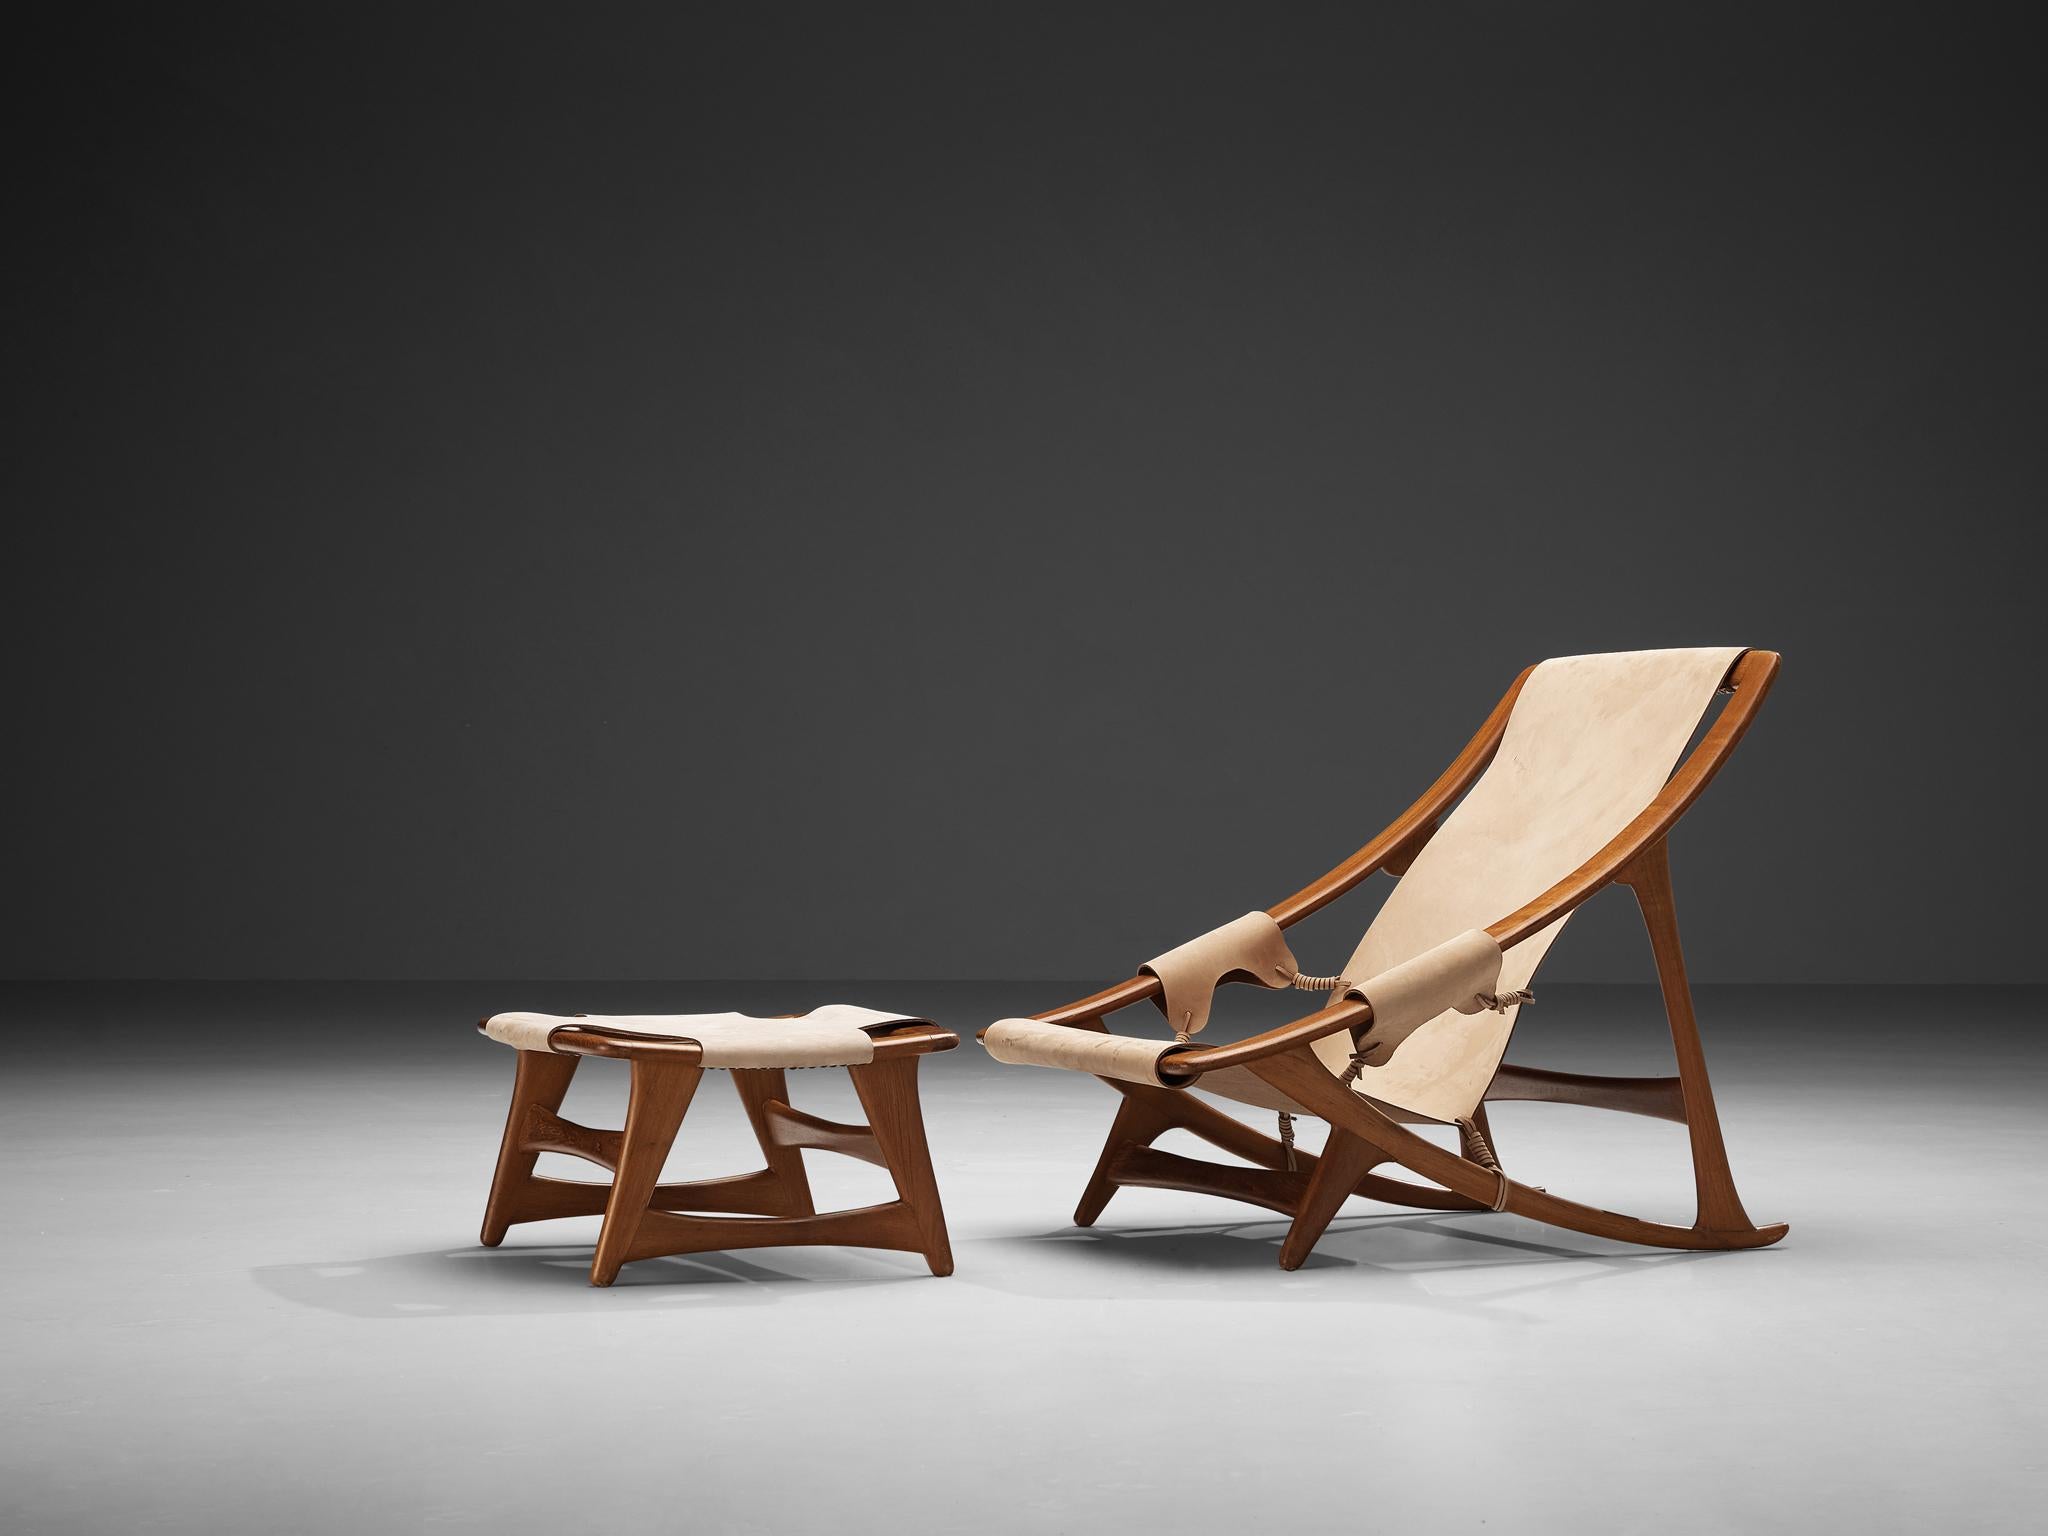 W.D. Andersag, lounge chair and ottoman, wood, leather, Italy, 1960s.

Designed by W.D. Andersag in the 1960s, this exquisite armchair and ottoman embrace a dynamic aesthetic characterized by sharp lines within its wooden frame. Drawing inspiration